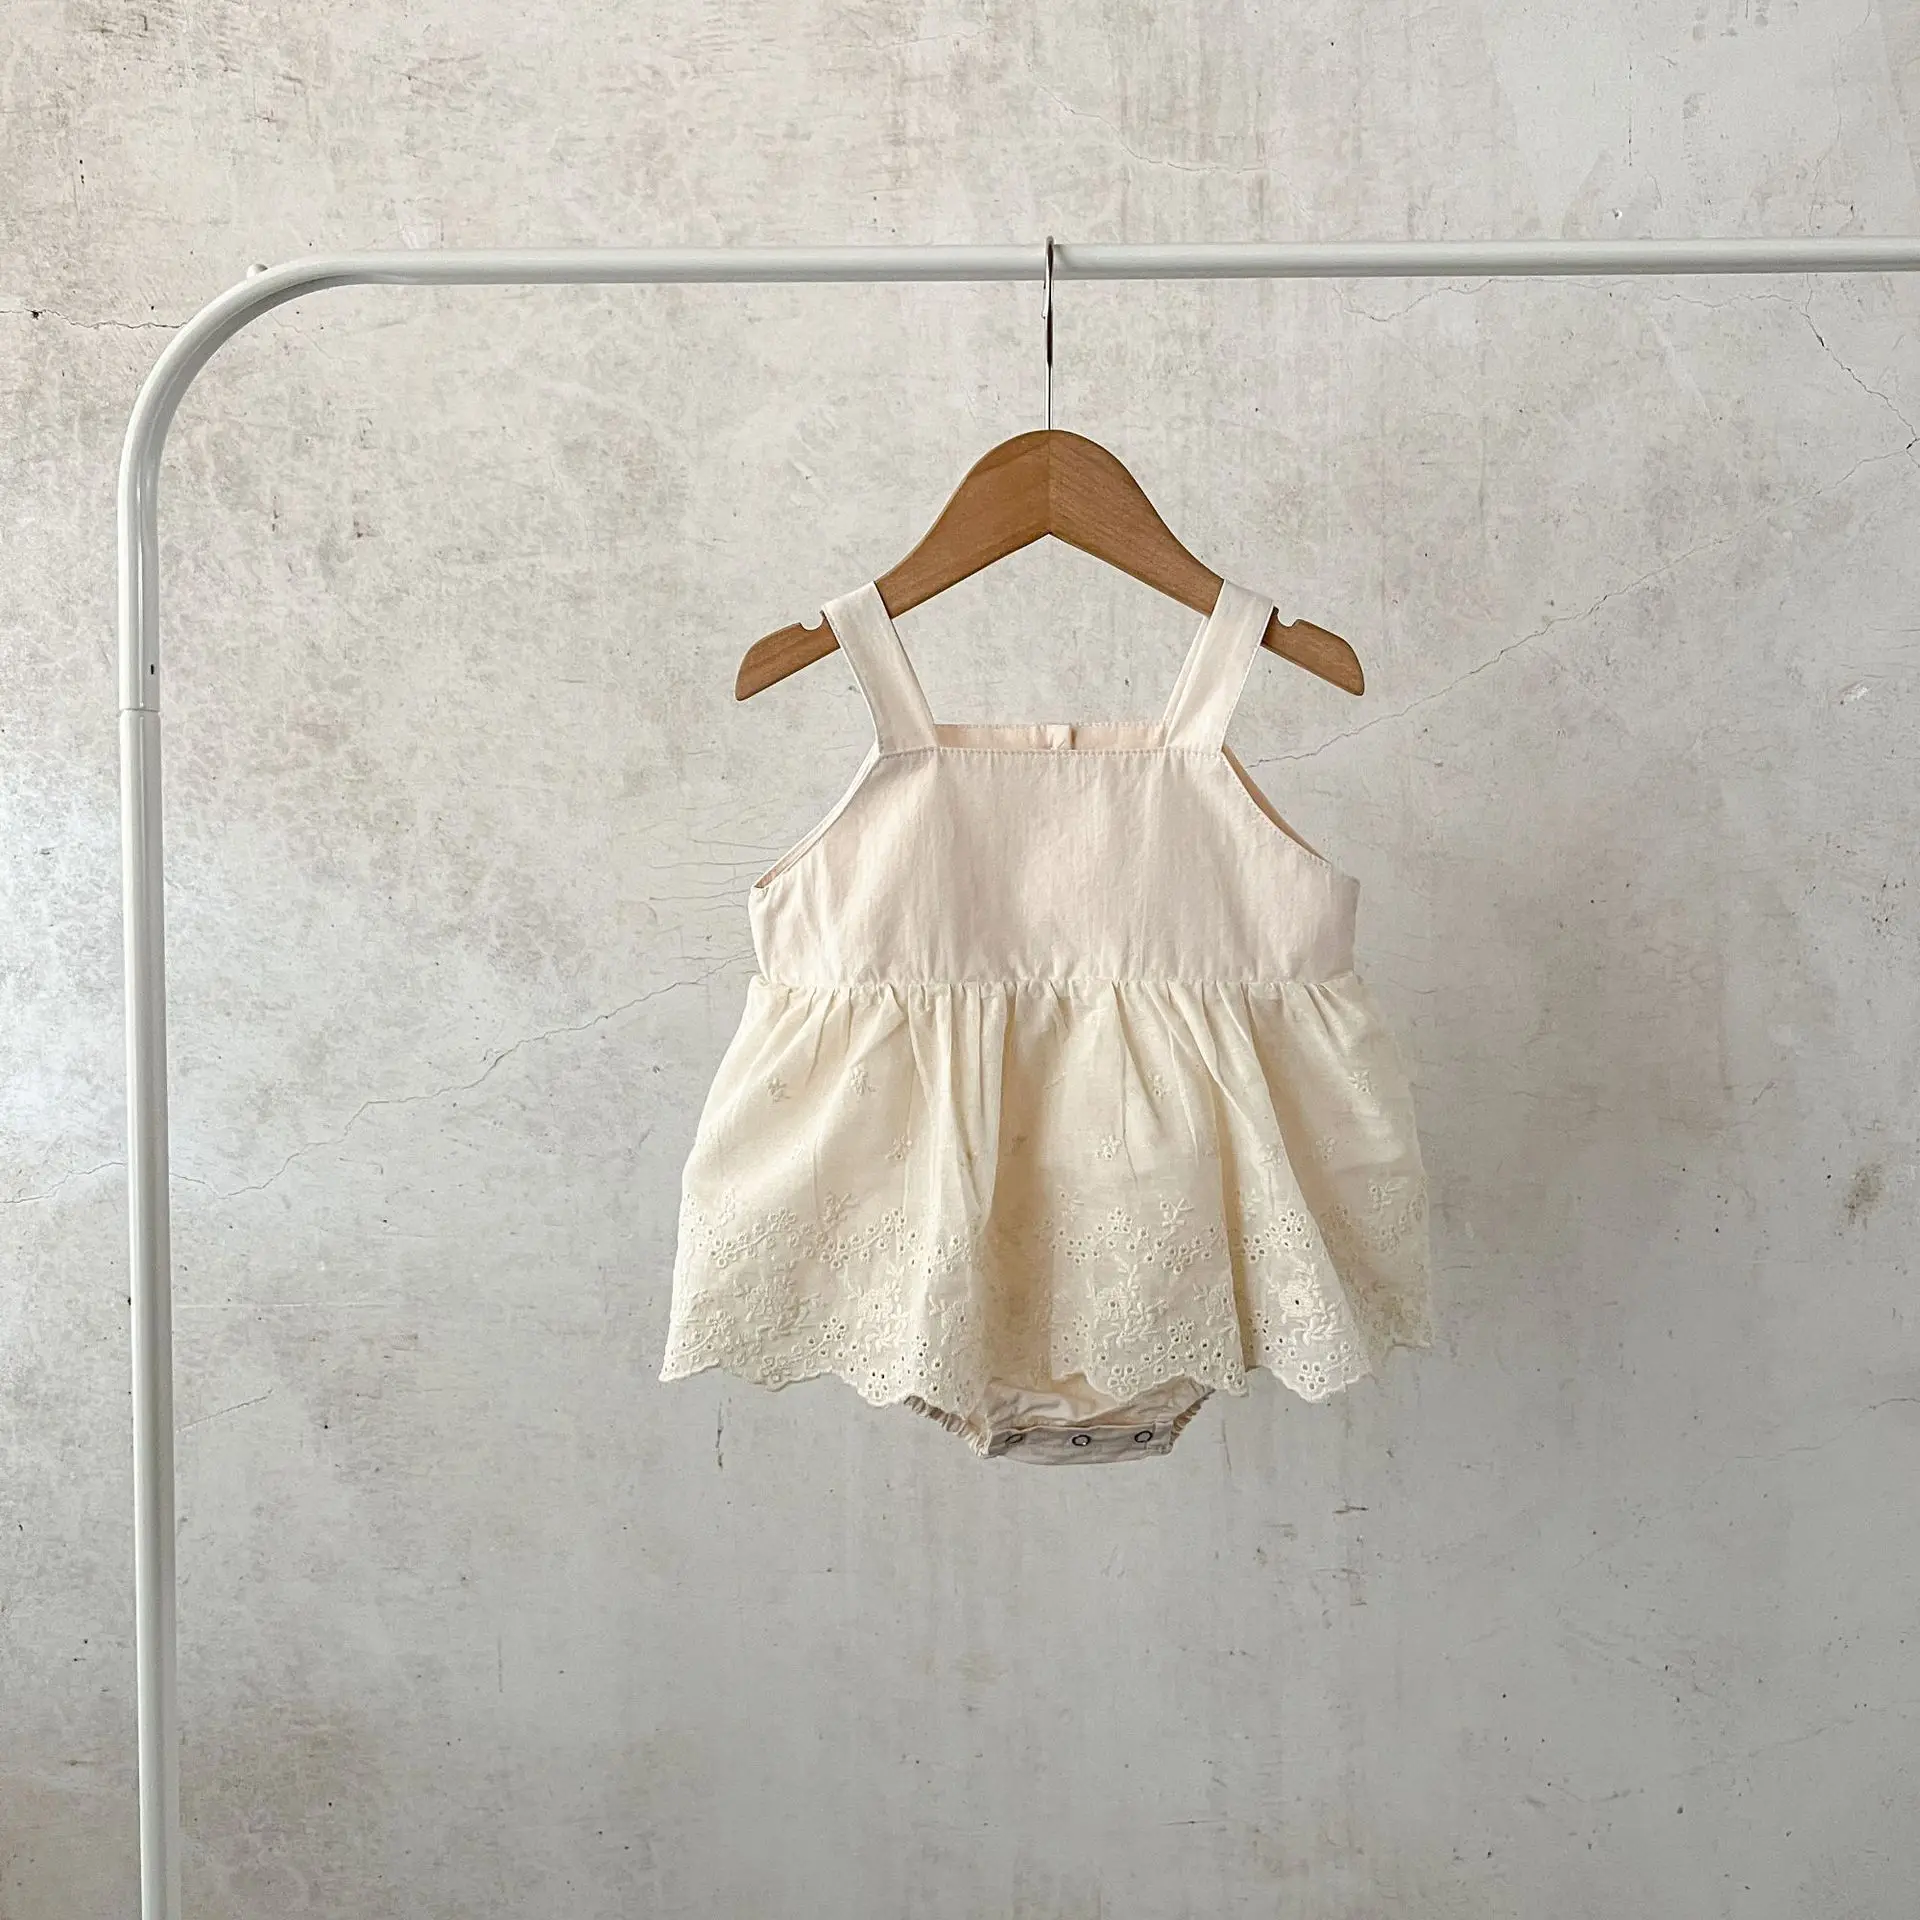 Summer Newborn Embroidered Hanging Strap Romper Infant Bread Pants Fashion Baby Girl Clothes